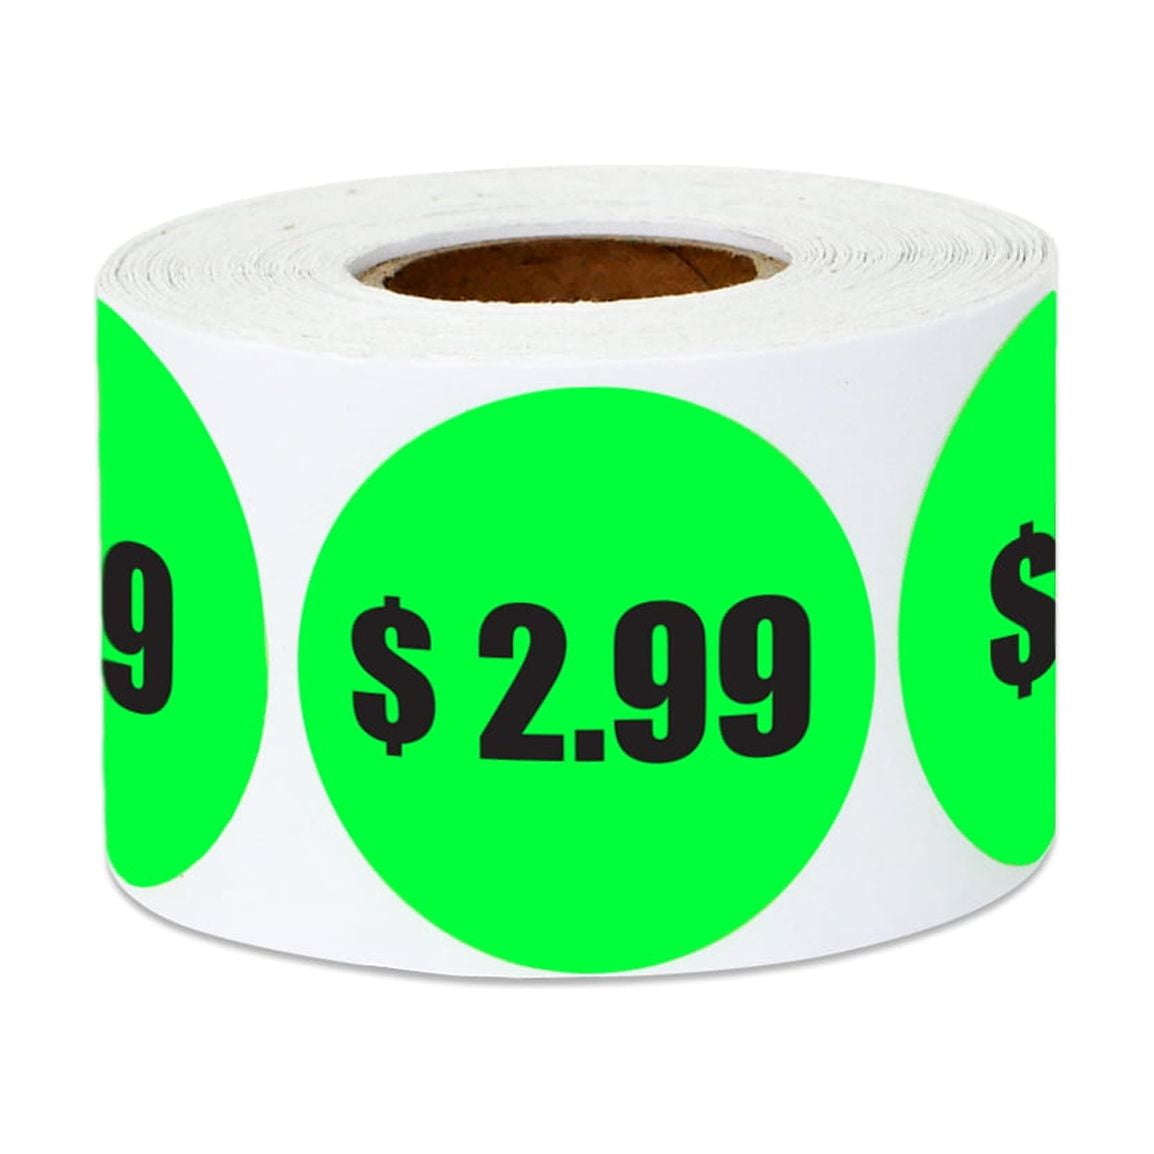 19.99 Pricing Labels  1.5x1 Red Price Sale Adhesive Stickers